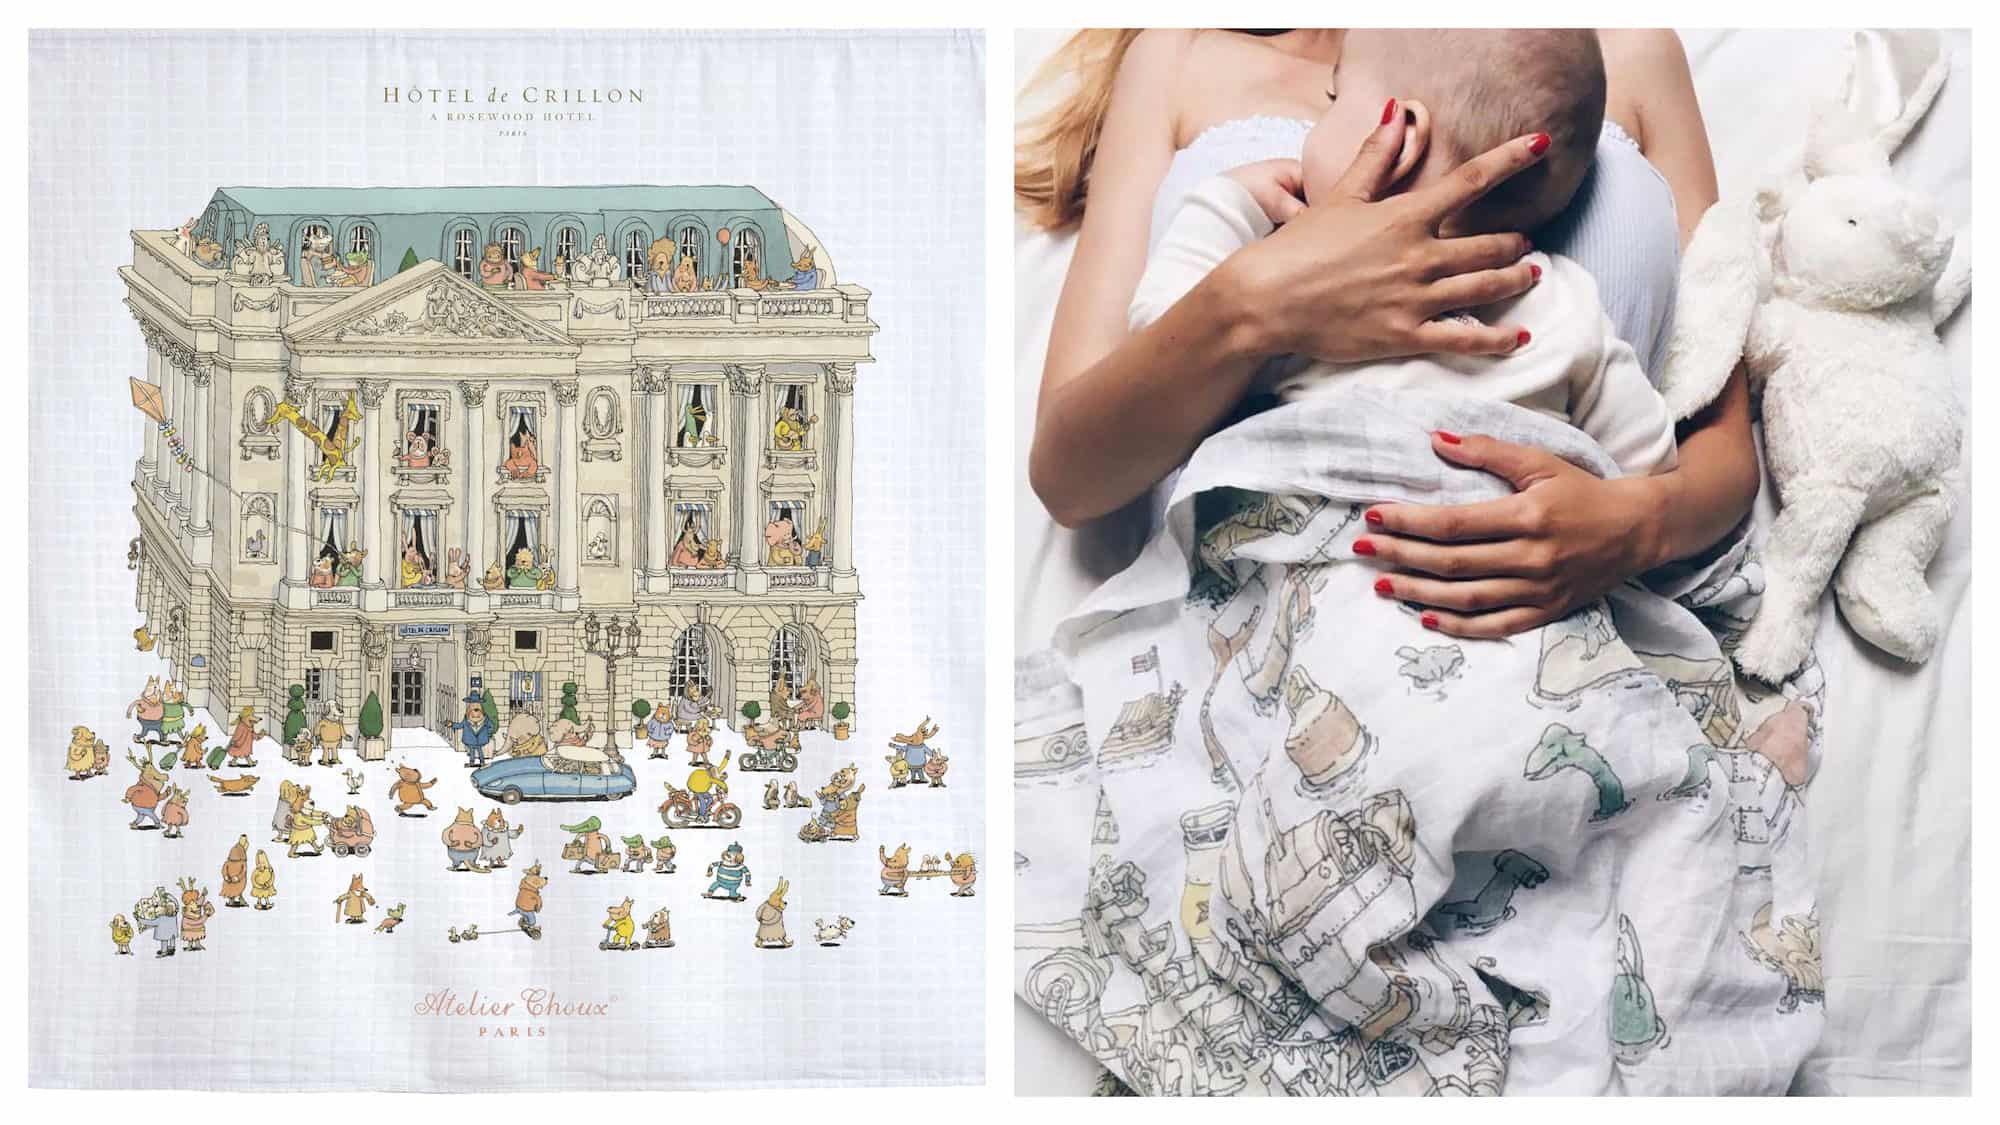 Pints by Atelier Choux Parisian baby boutique (right). A mother lying down with her baby rapped up in an Atelier Choux blanket (right).